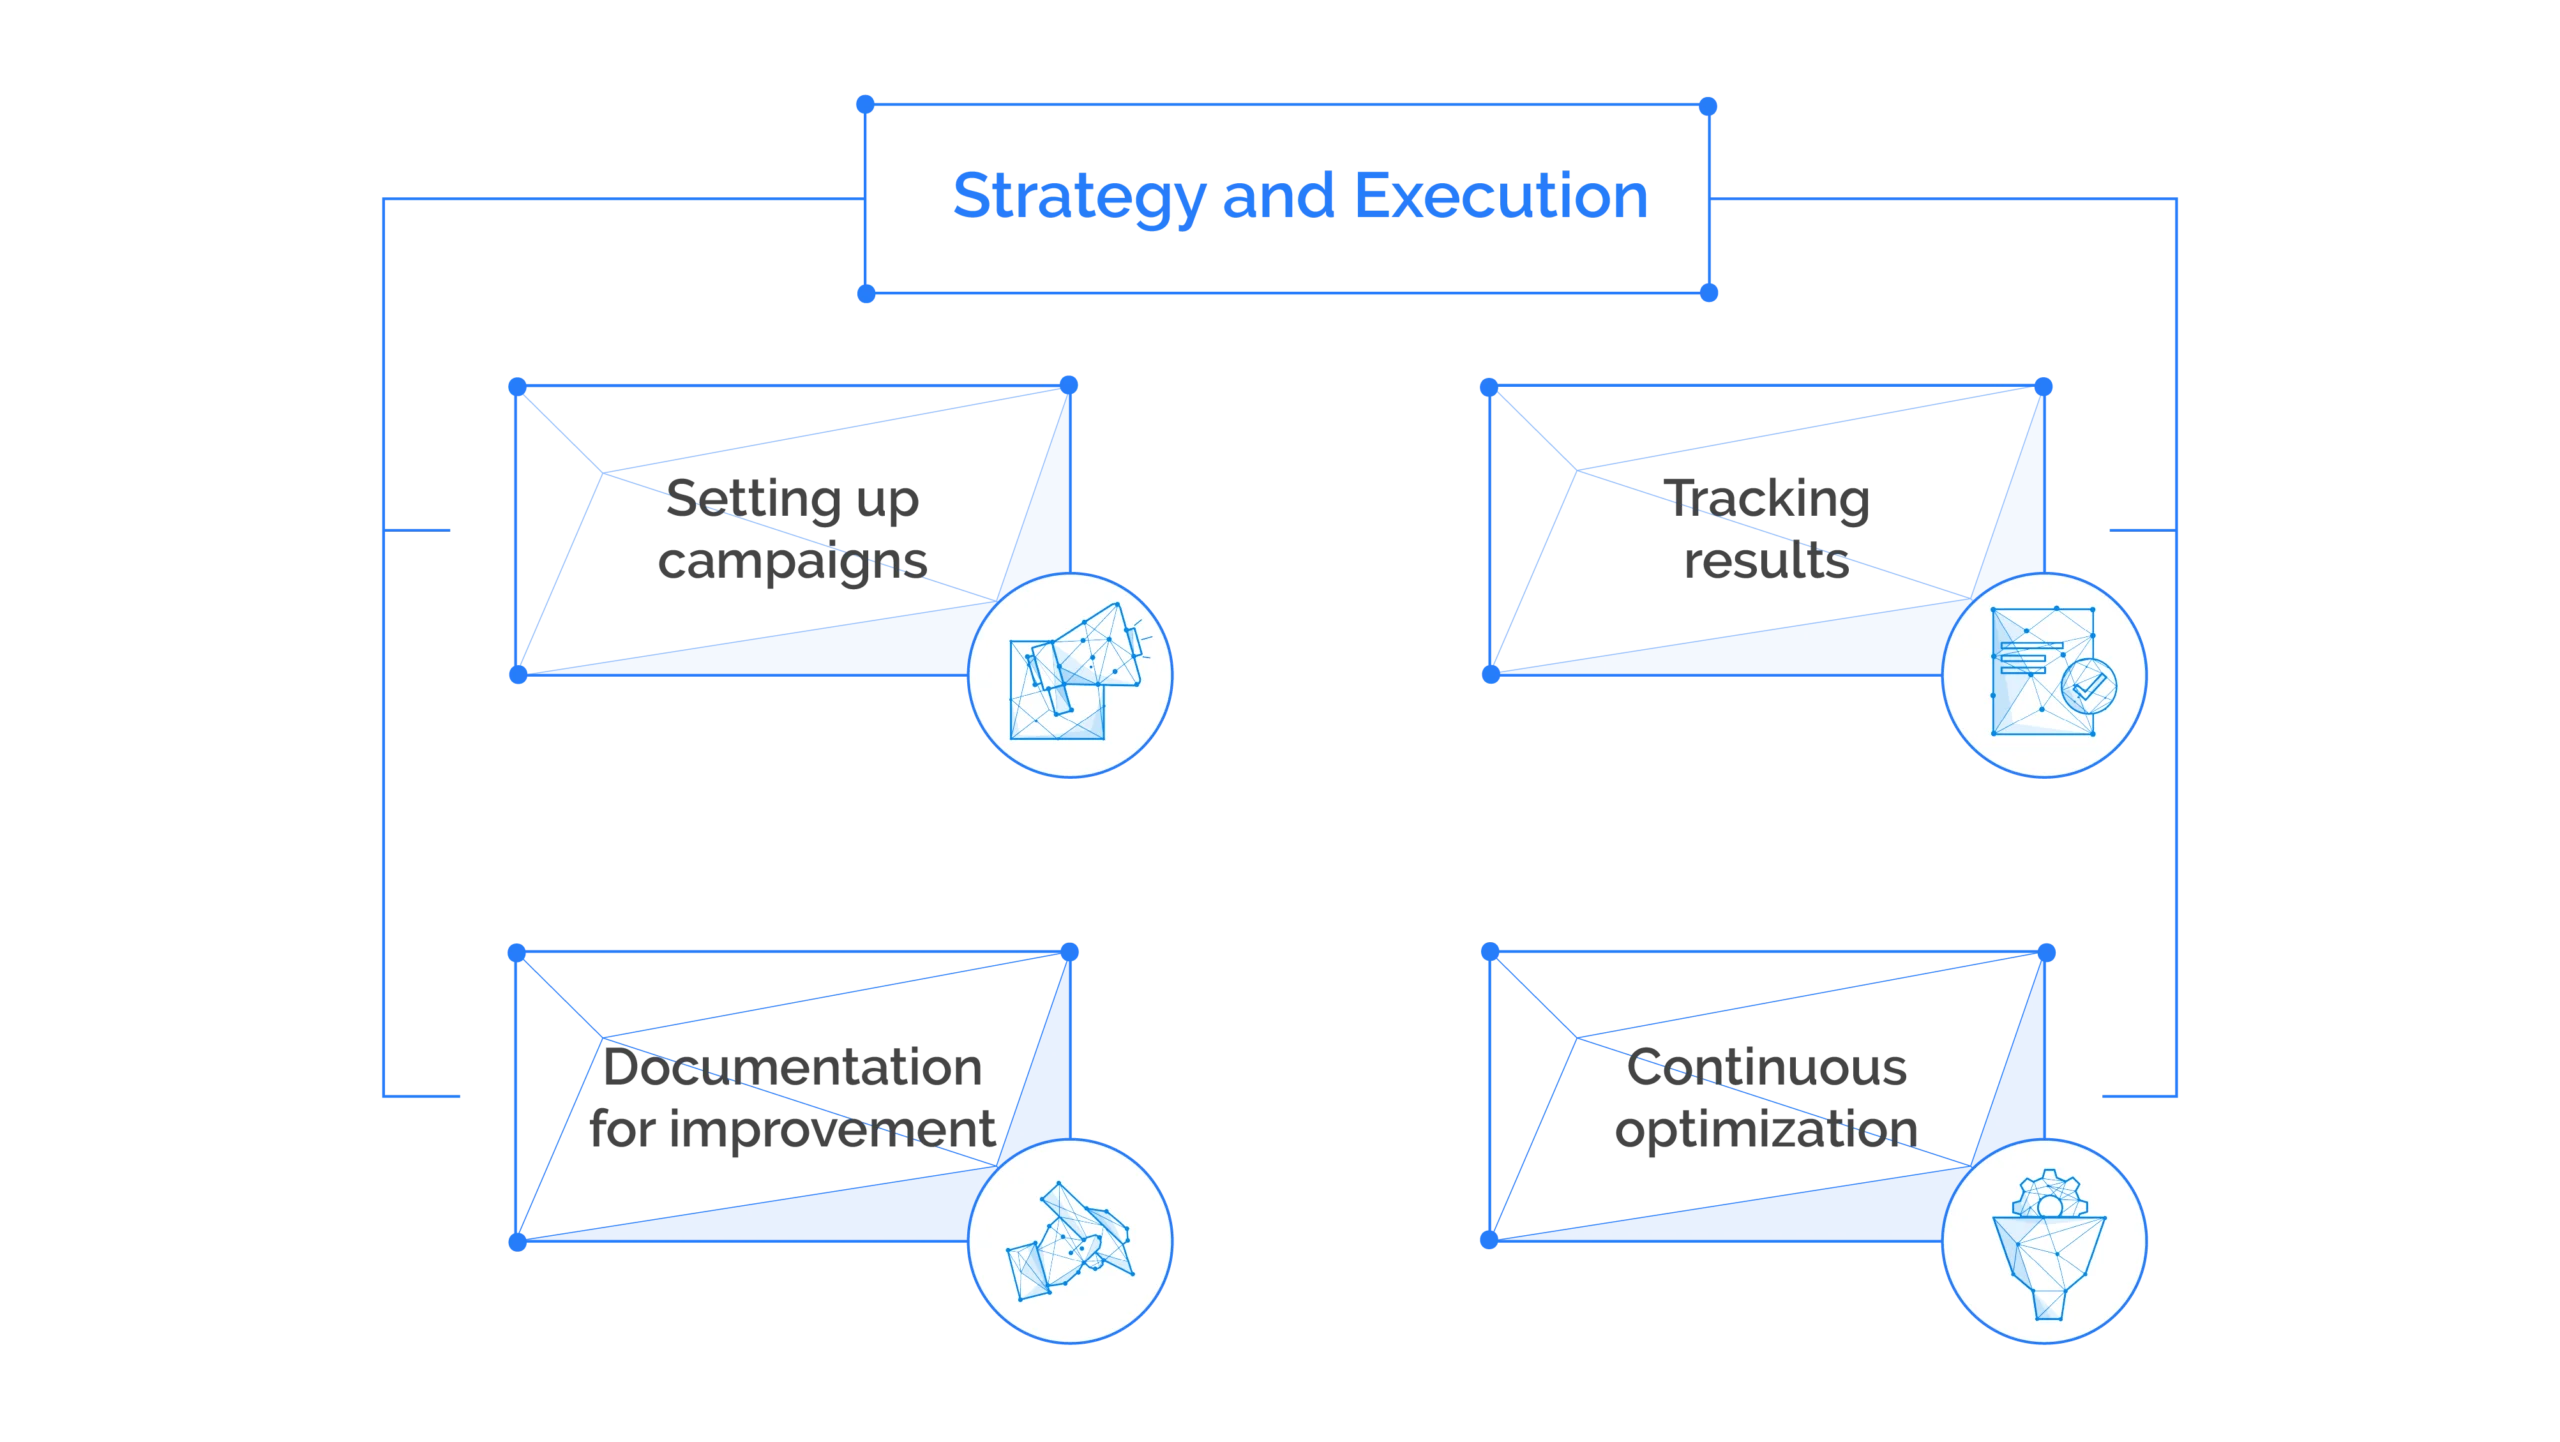 Strategy and Execution Map of Propelrr's Digital Marketing Framework